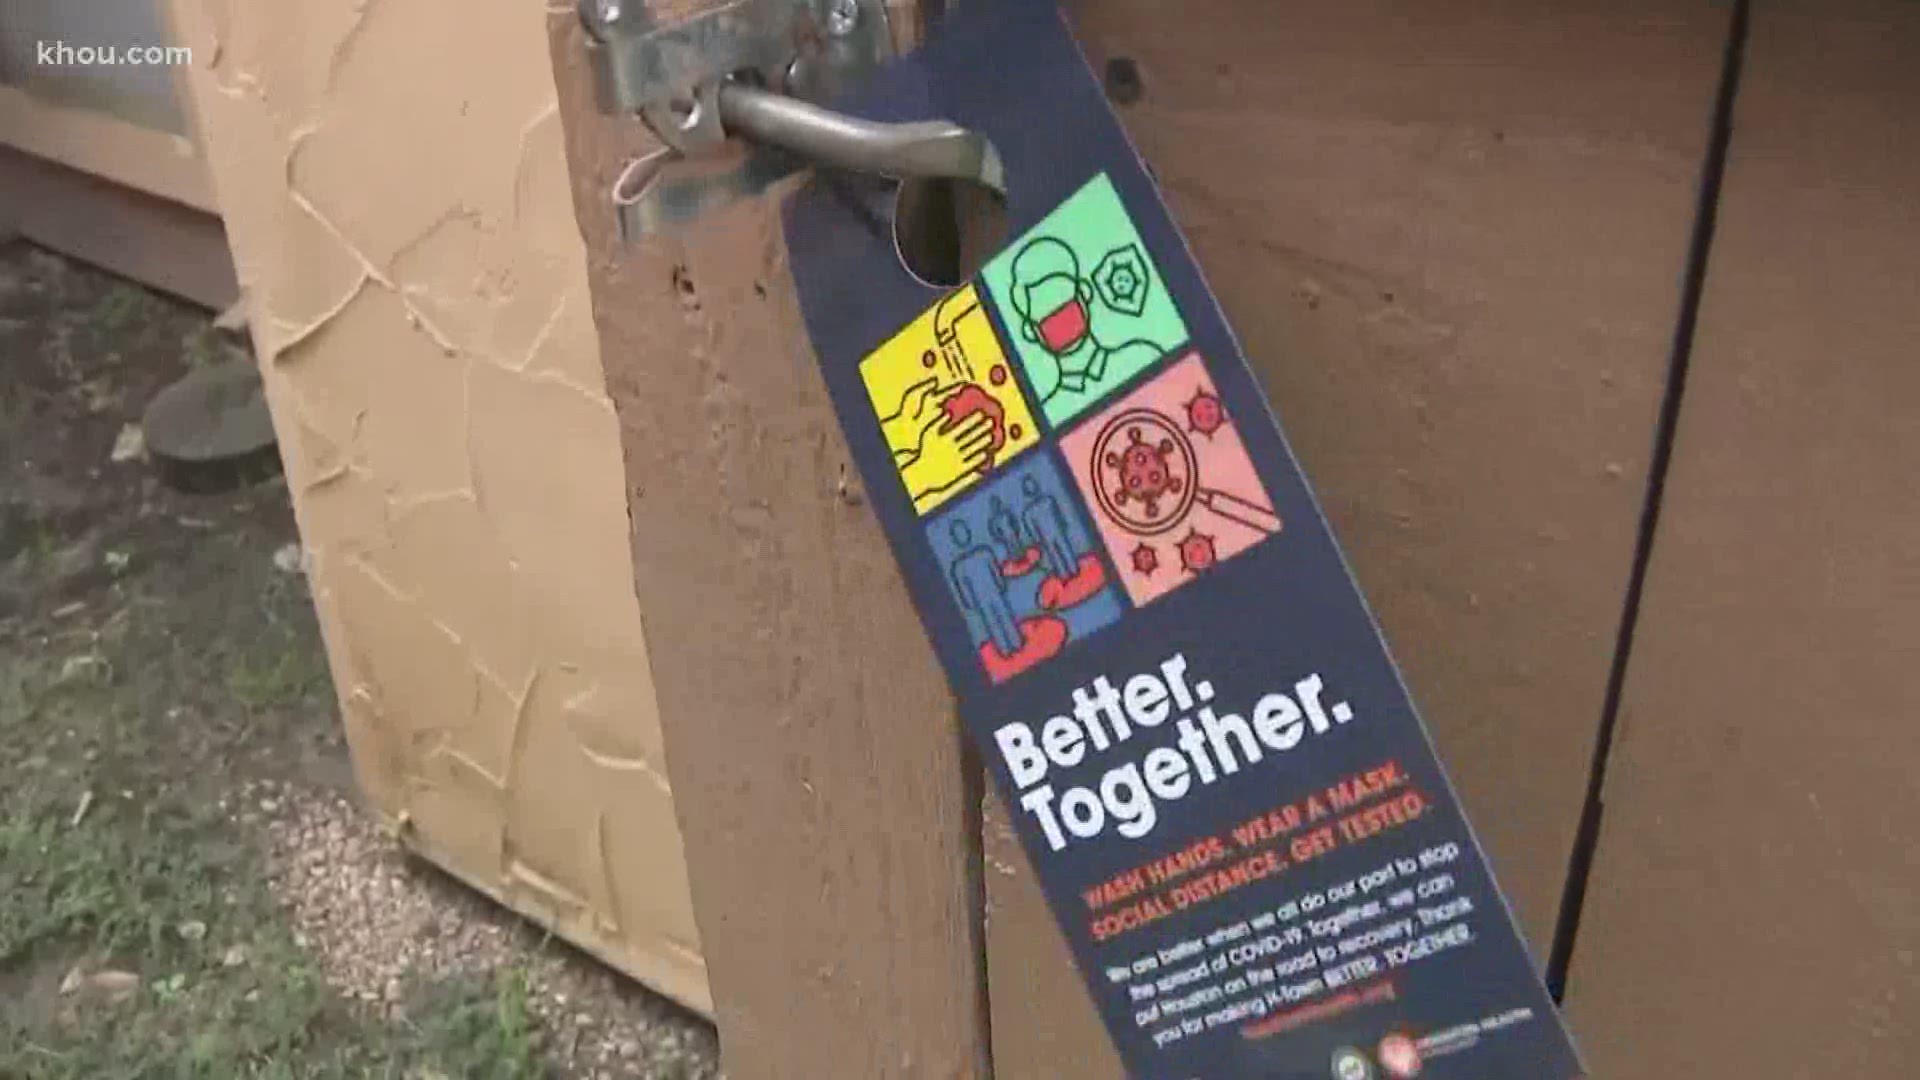 Health department workers hope to teach residents how to protect themselves against the coronavirus  with the "Better Together" campaign.